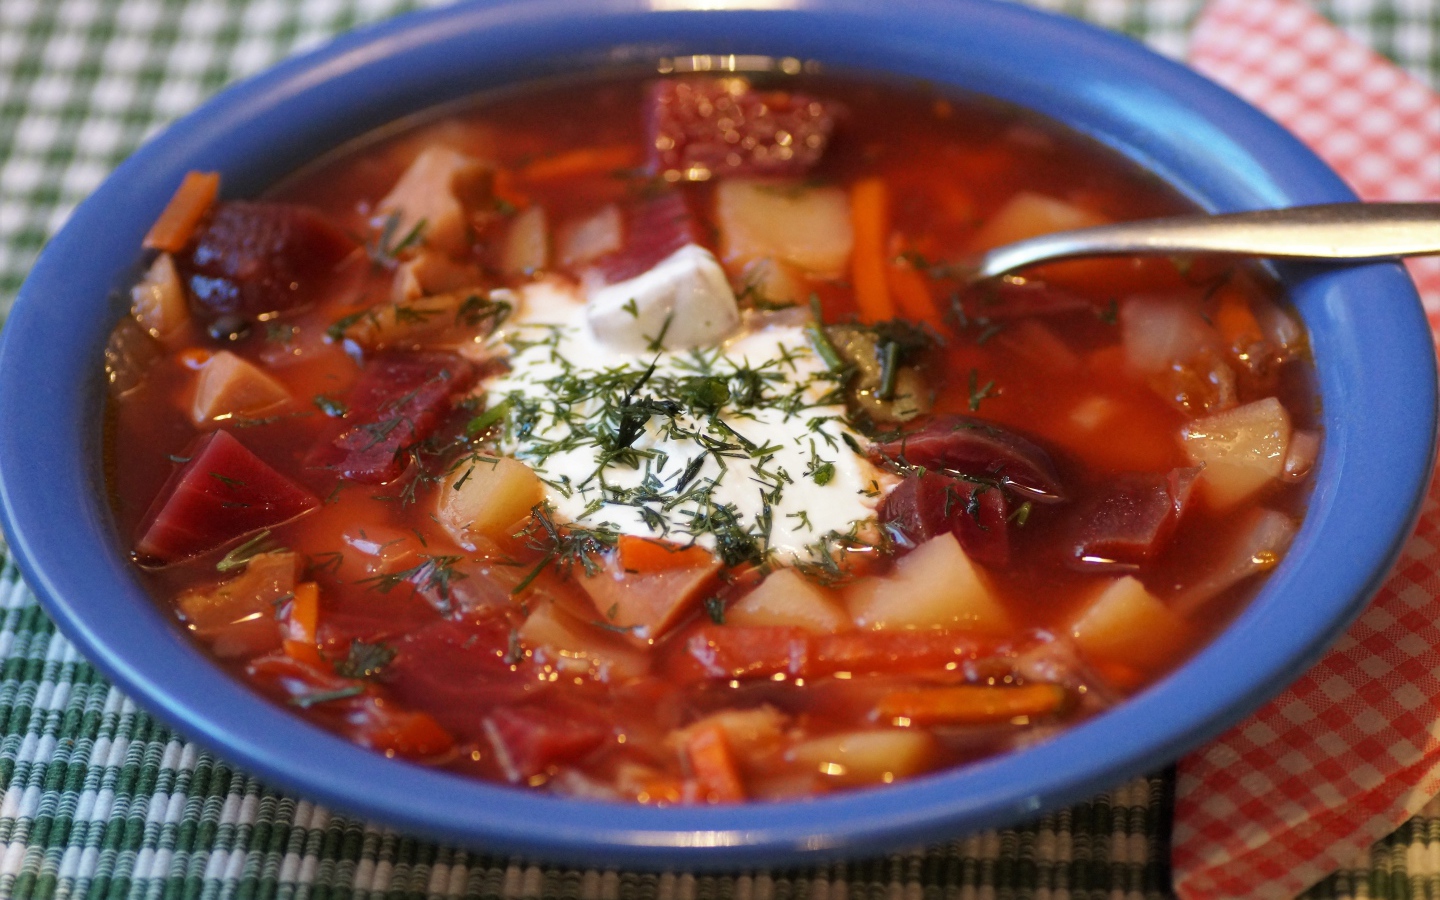 Borscht with sour cream in a blue bowl on the table